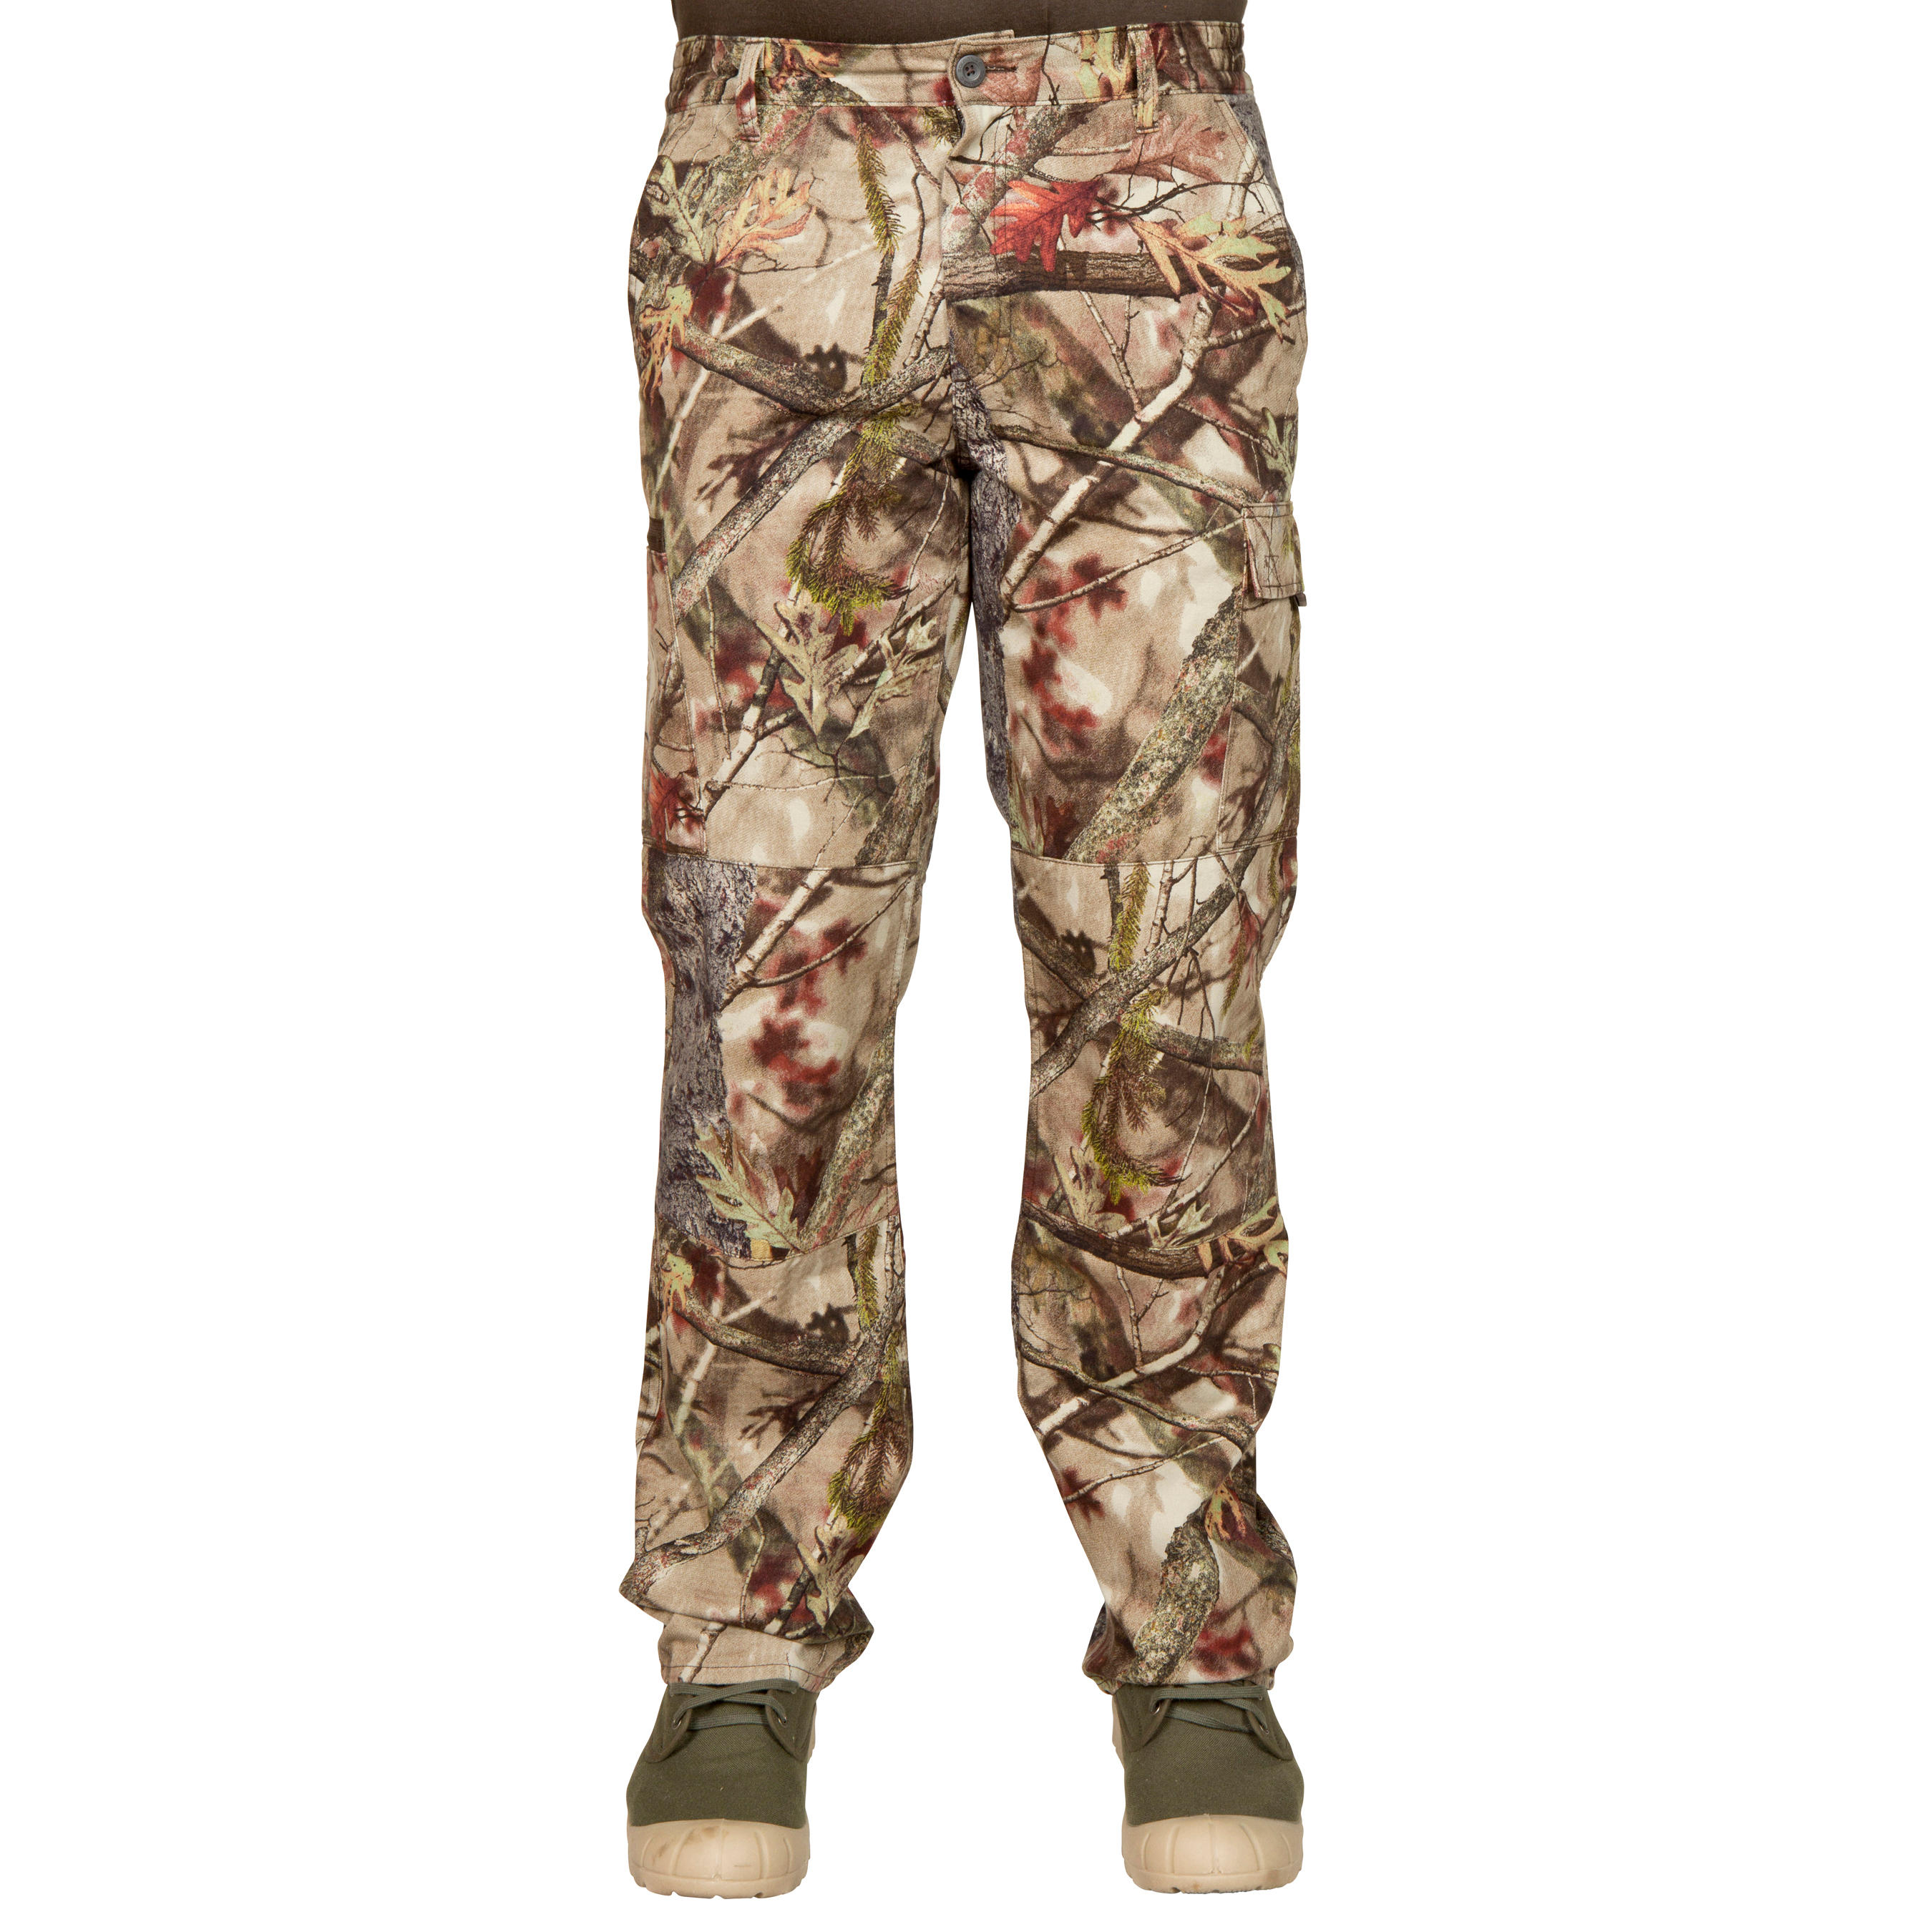 Breathable Trousers - Woodland Camo 2/9